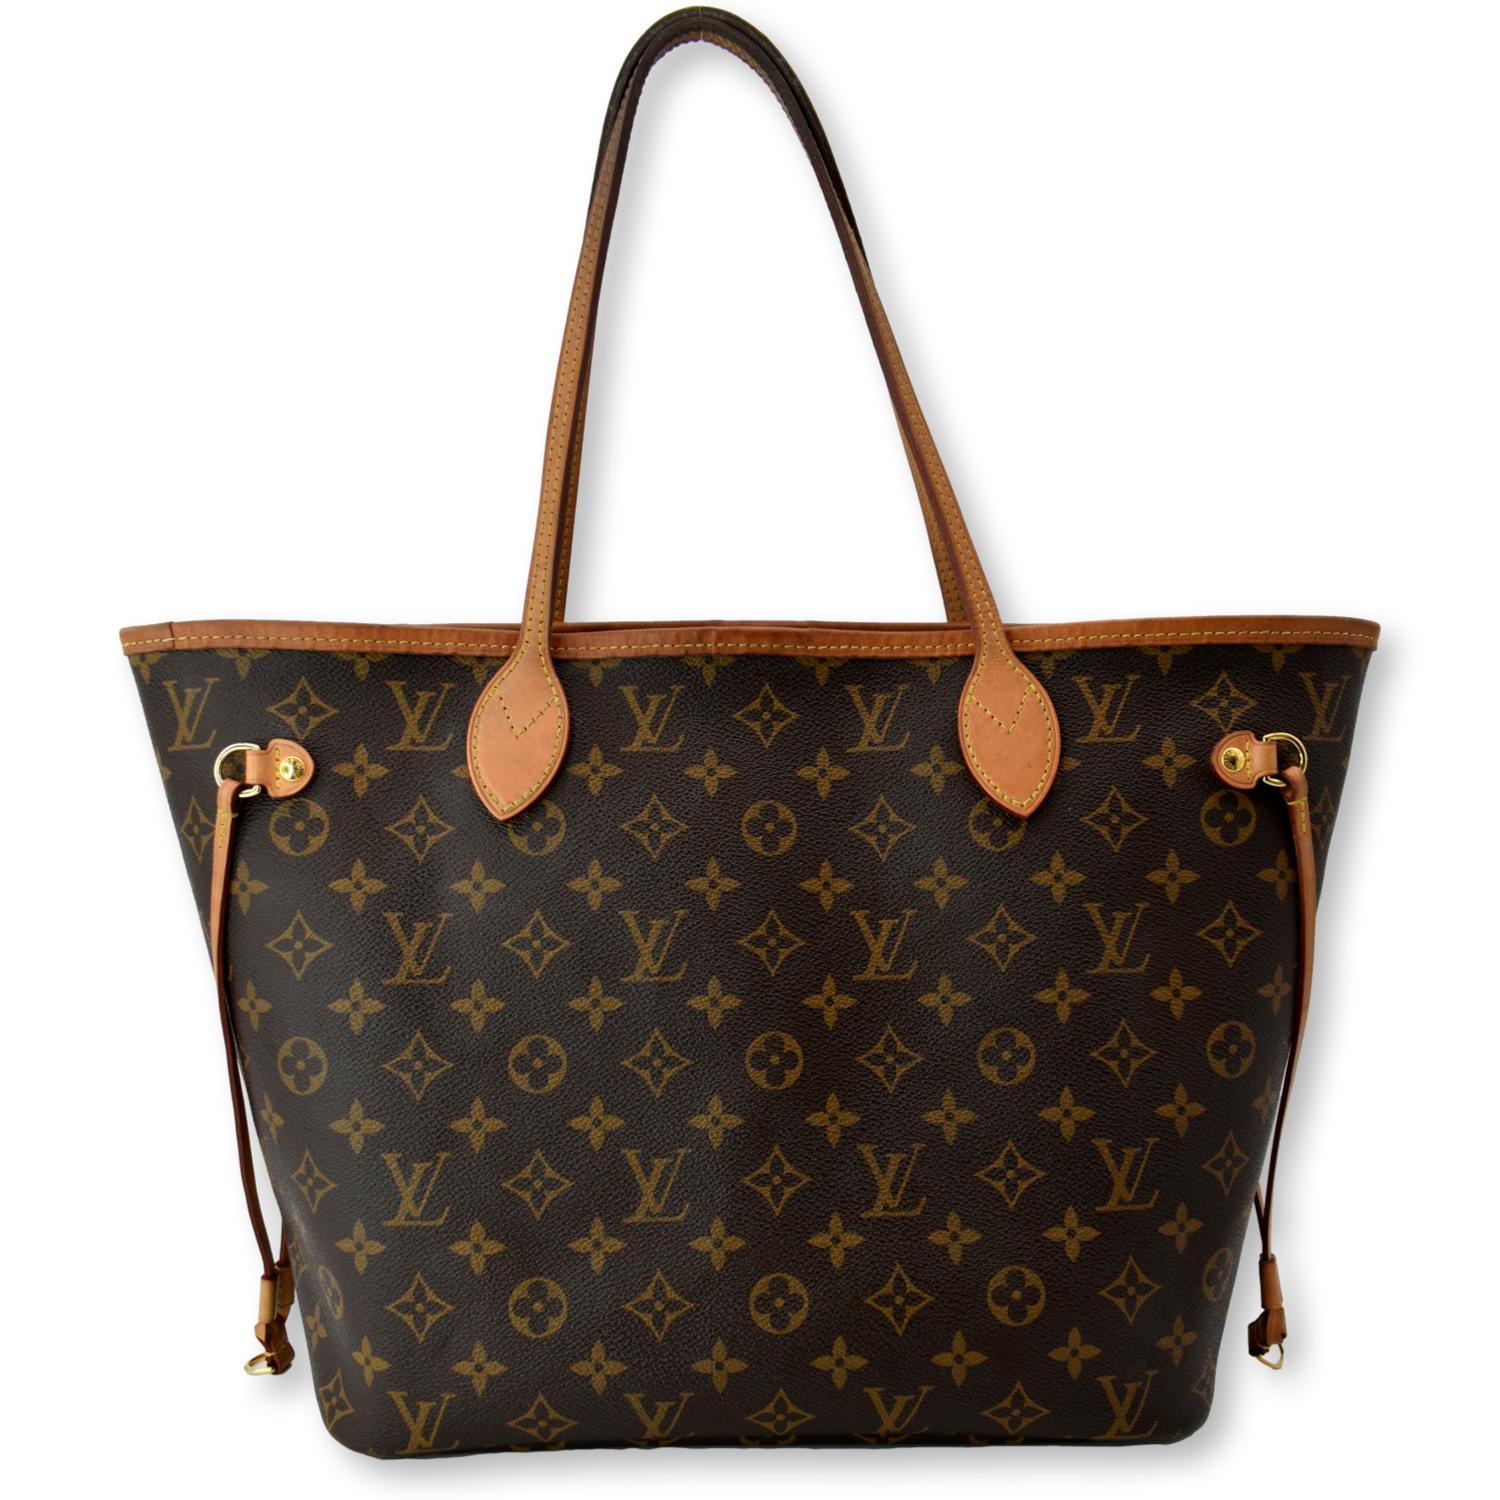 🔴SOLD🔴Louis Vuitton District MM - at an amazing price! Only $800